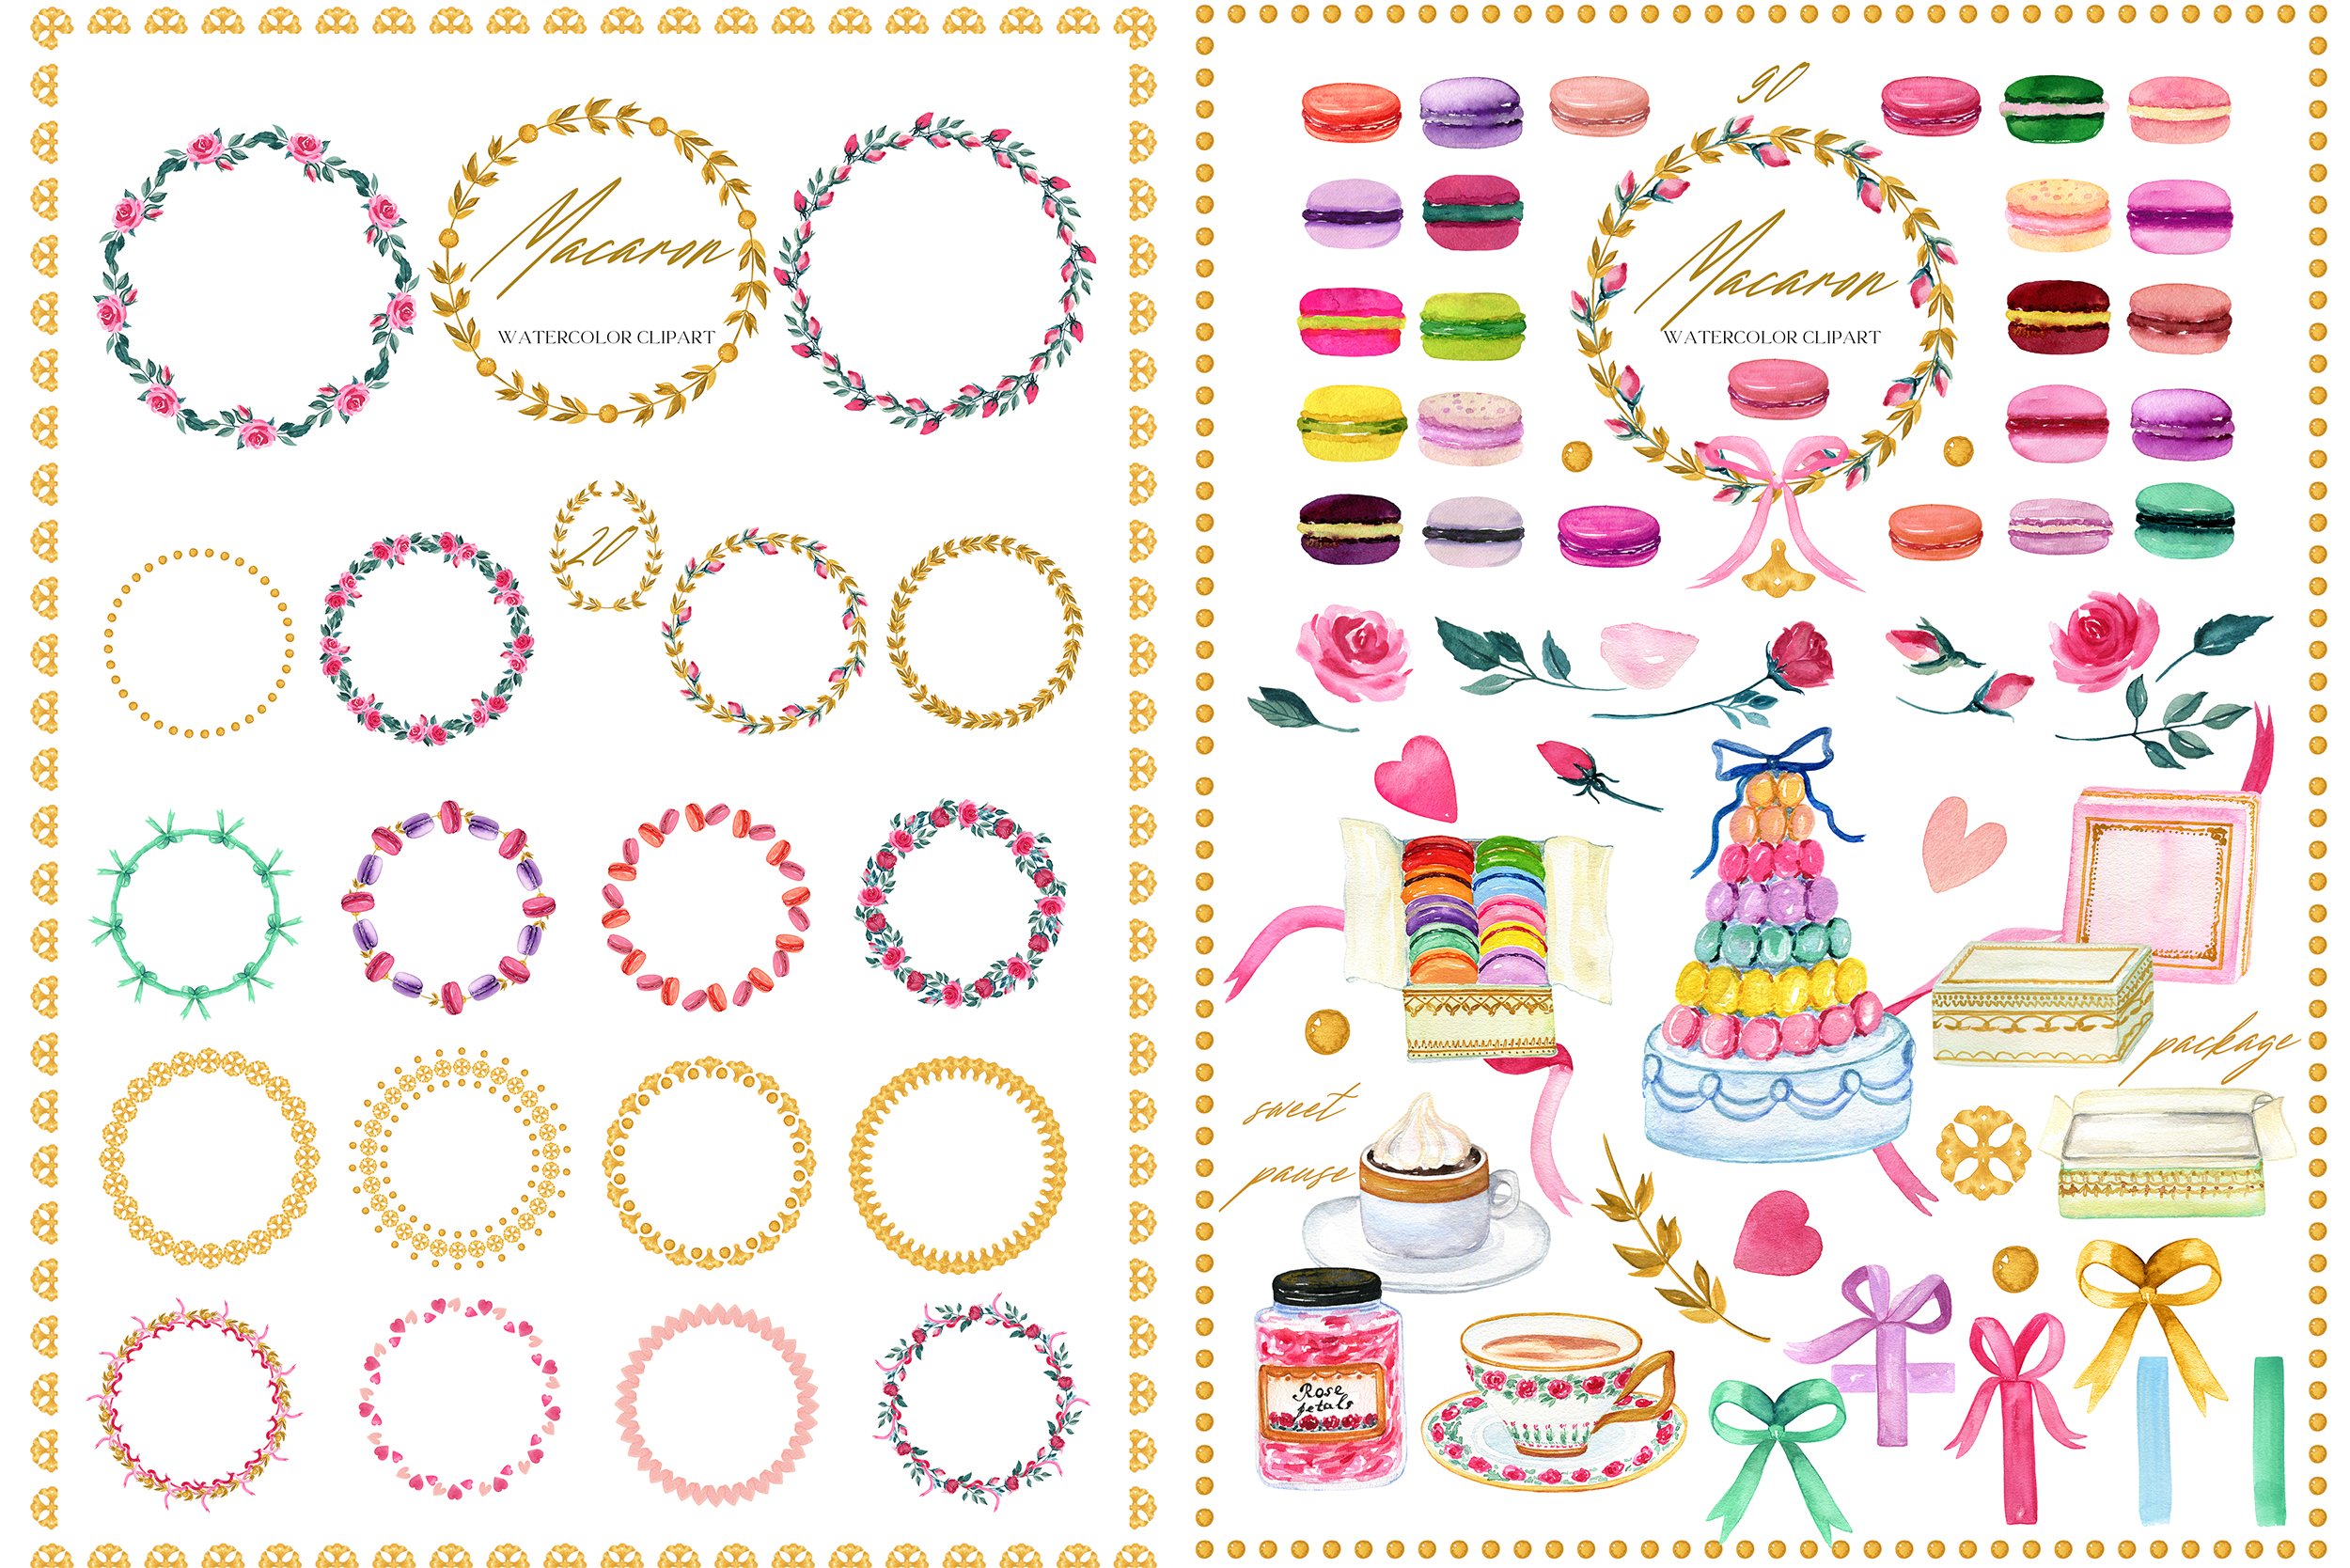 Diverse of sweets elements for full macaroon illustration.